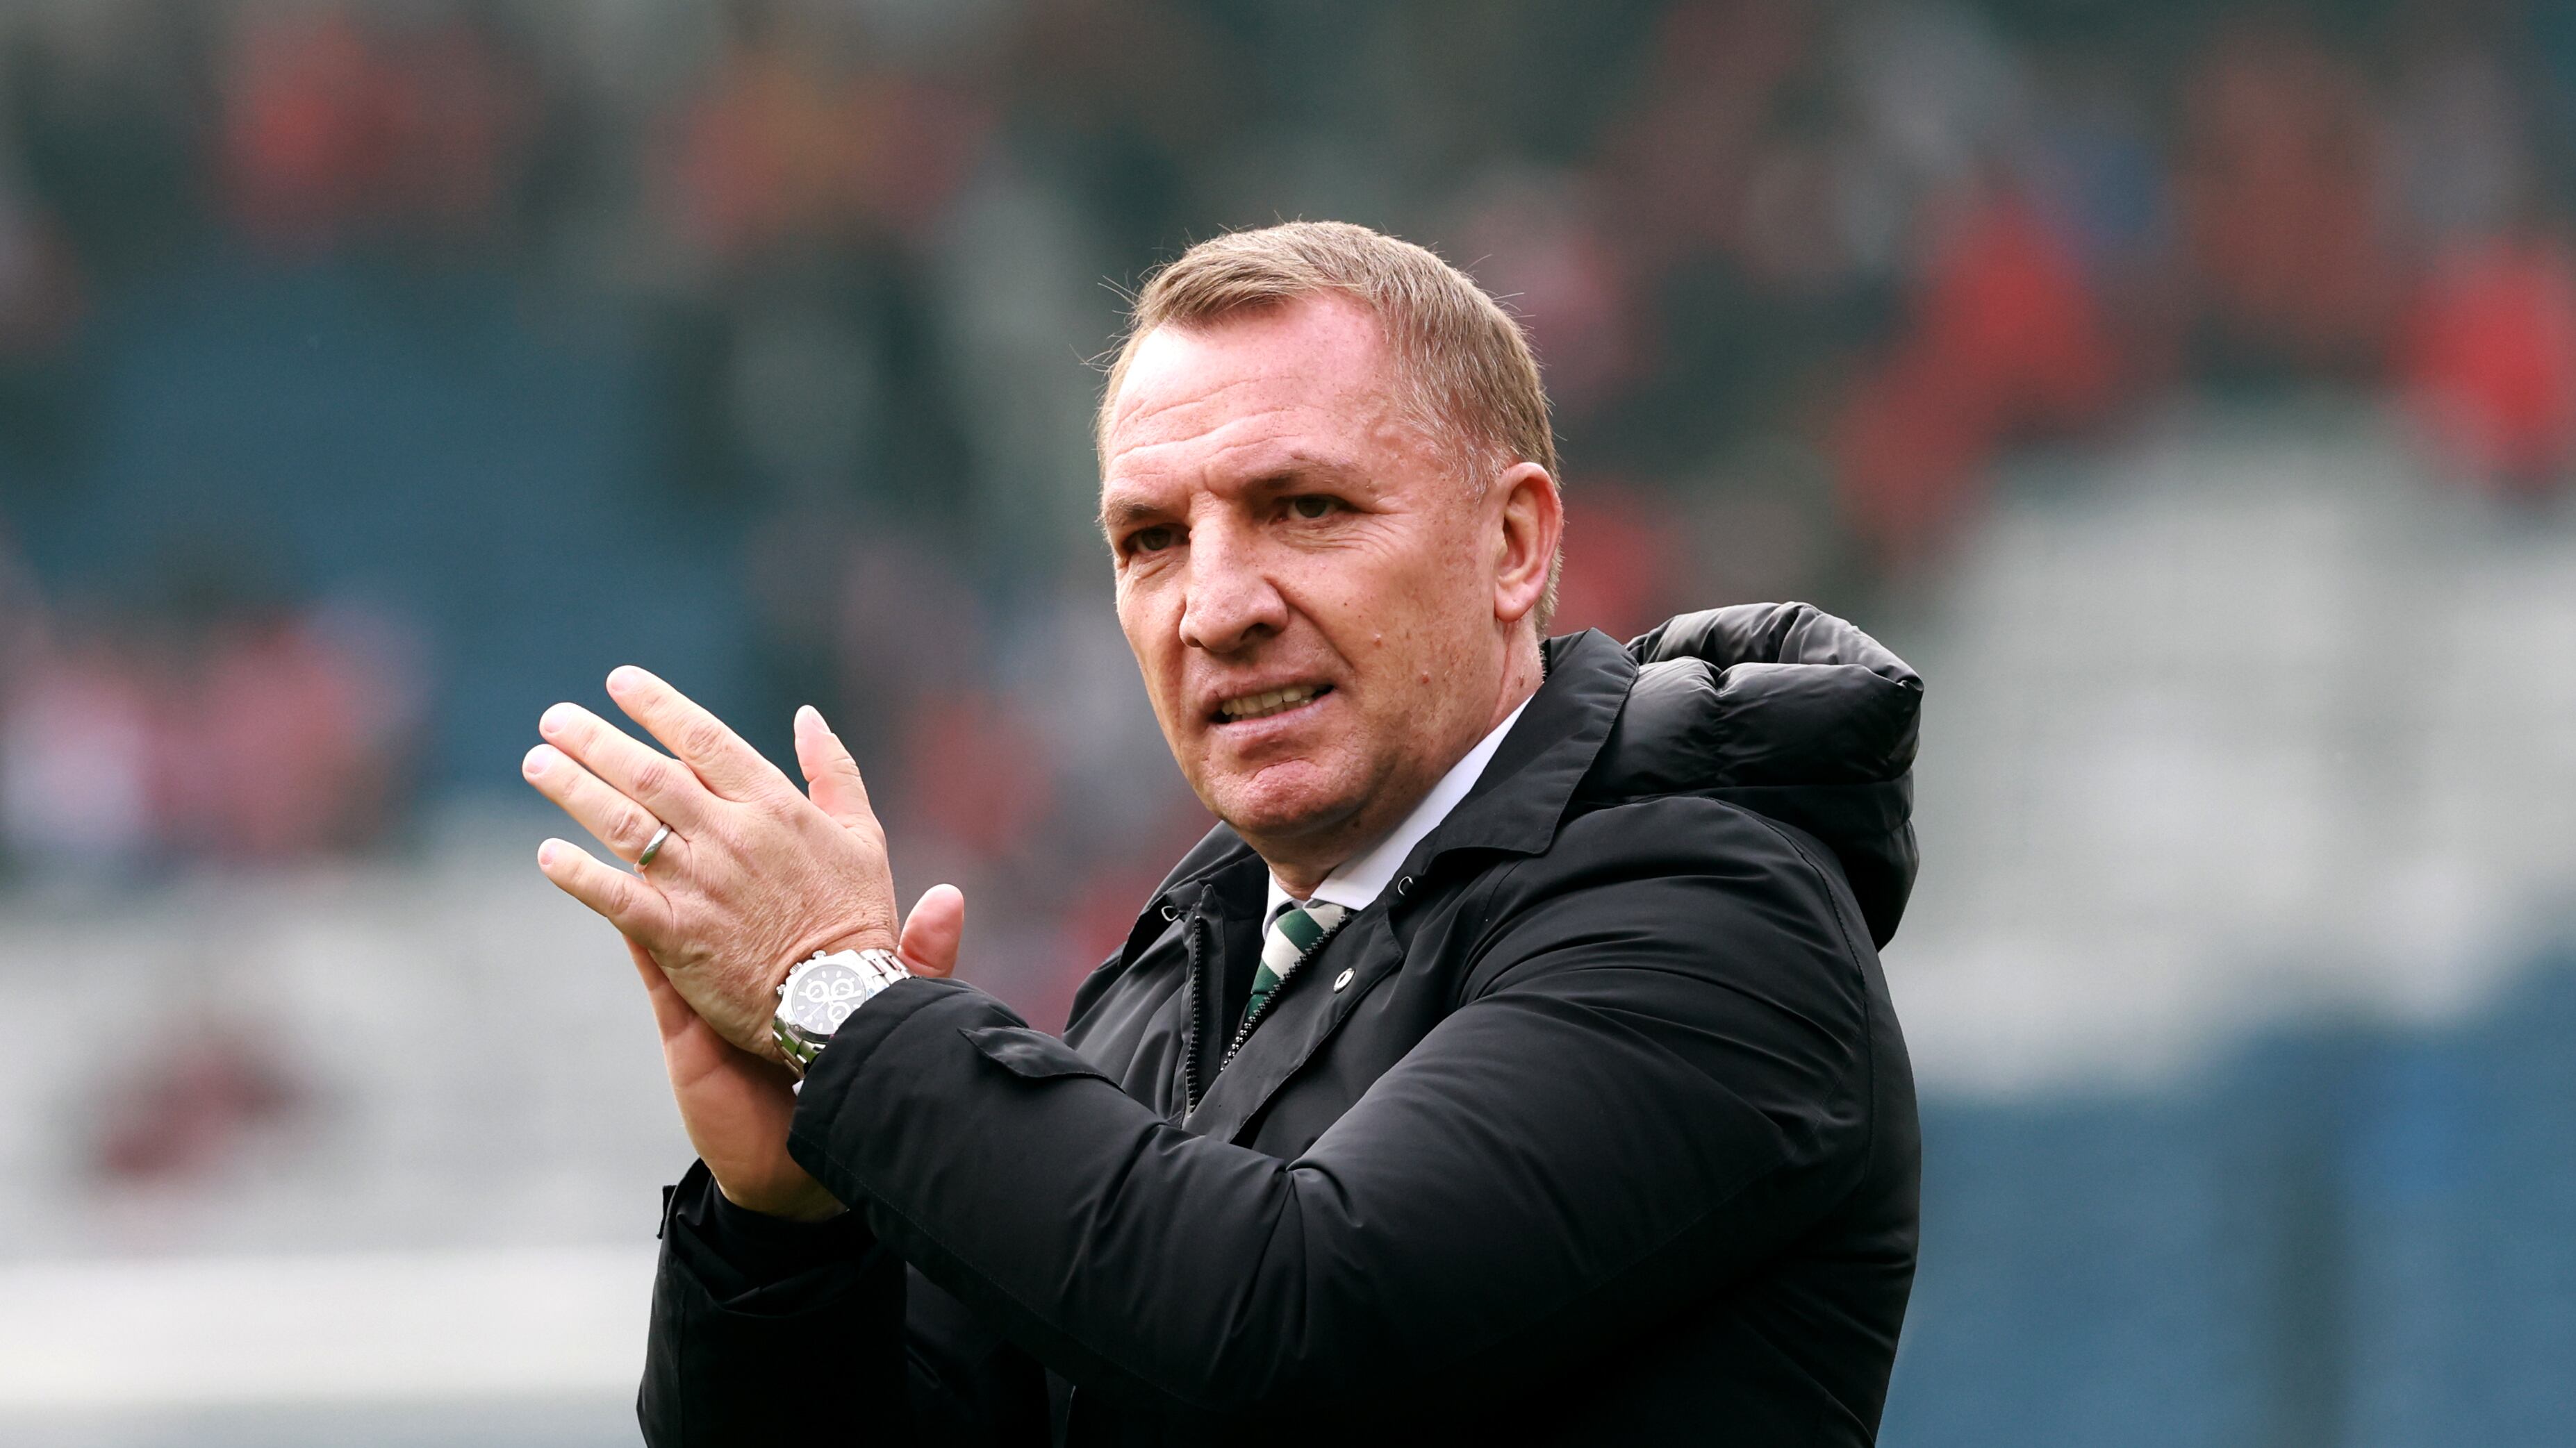 The Celtic manager denied showing any disrespect